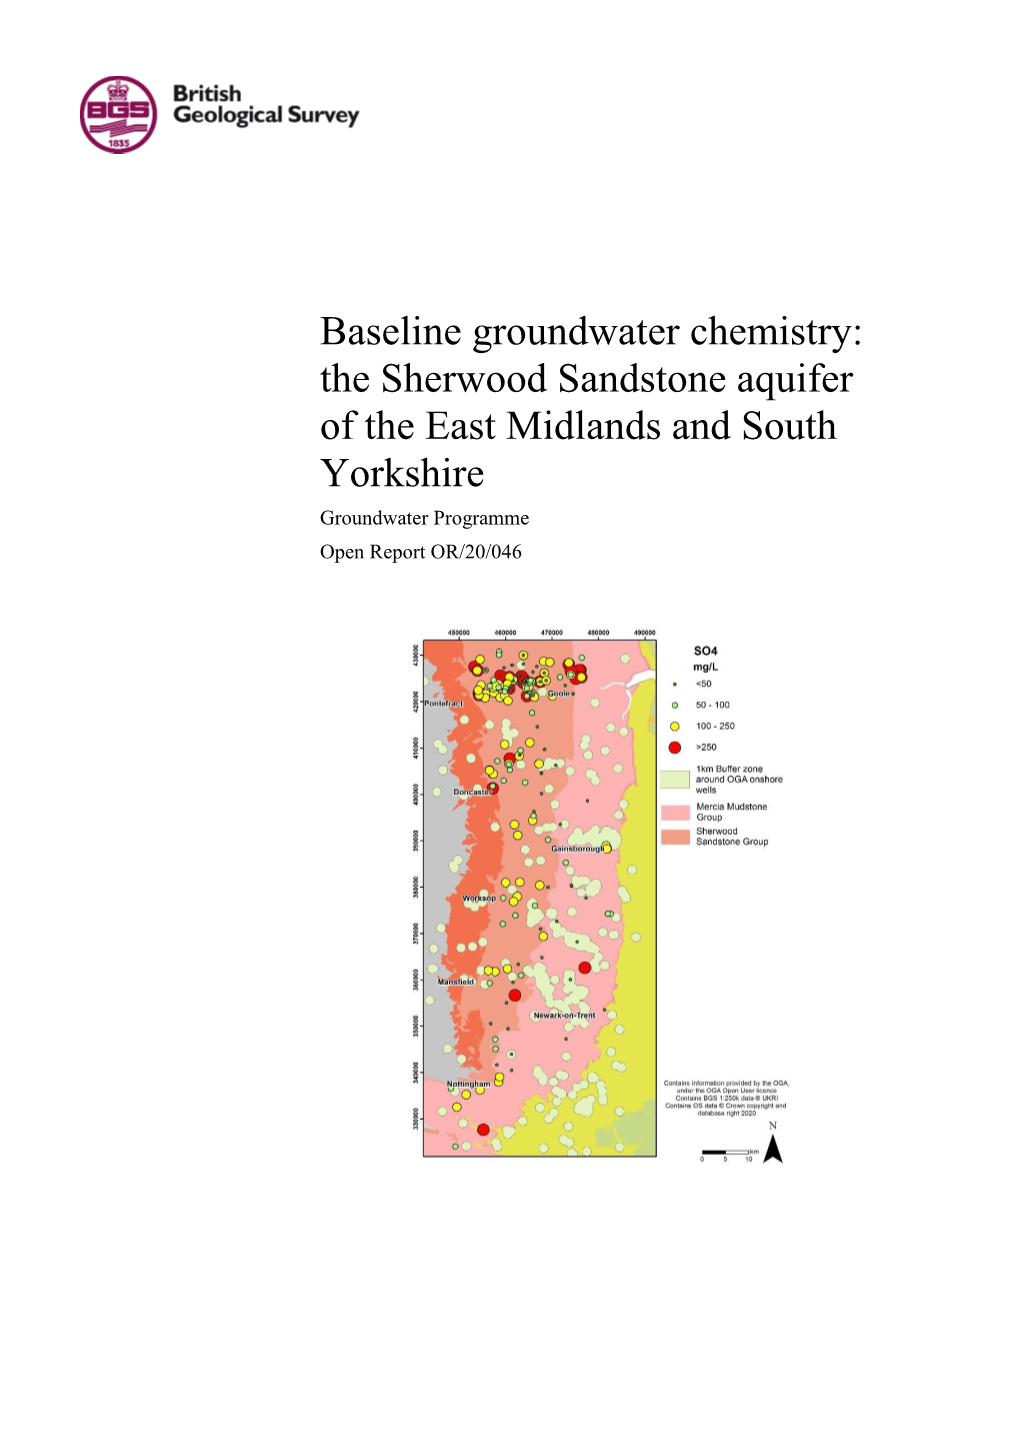 Baseline Groundwater Chemistry: the Sherwood Sandstone Aquifer of the East Midlands and South Yorkshire Groundwater Programme Open Report OR/20/046